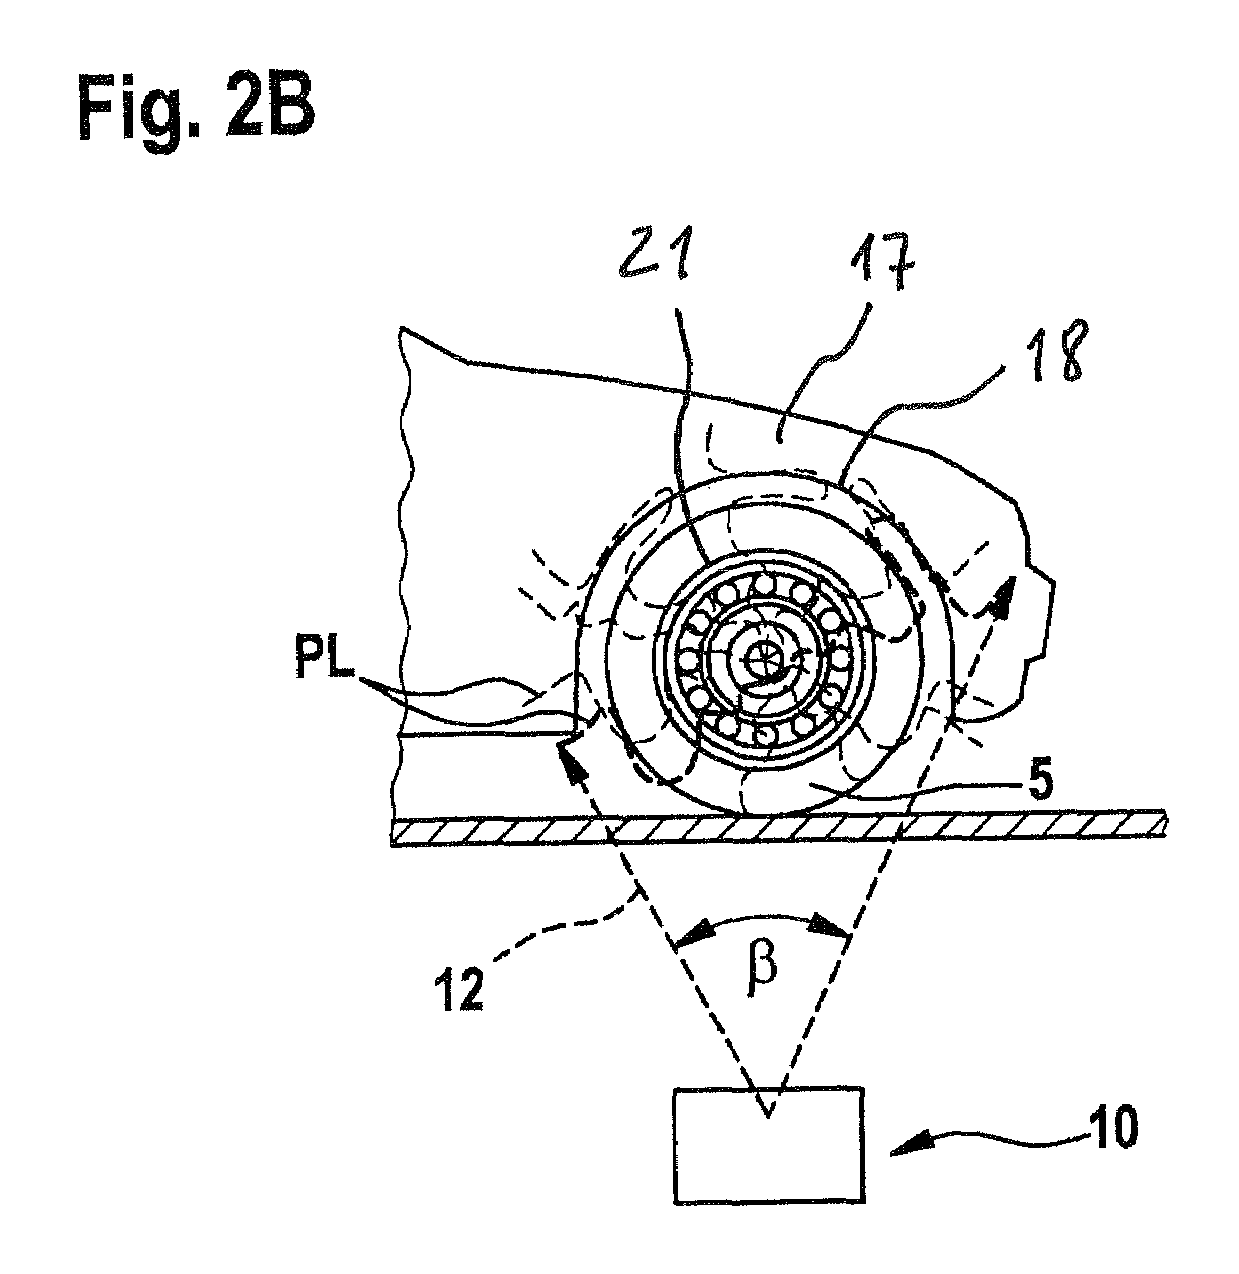 Method for optical chassis measurement